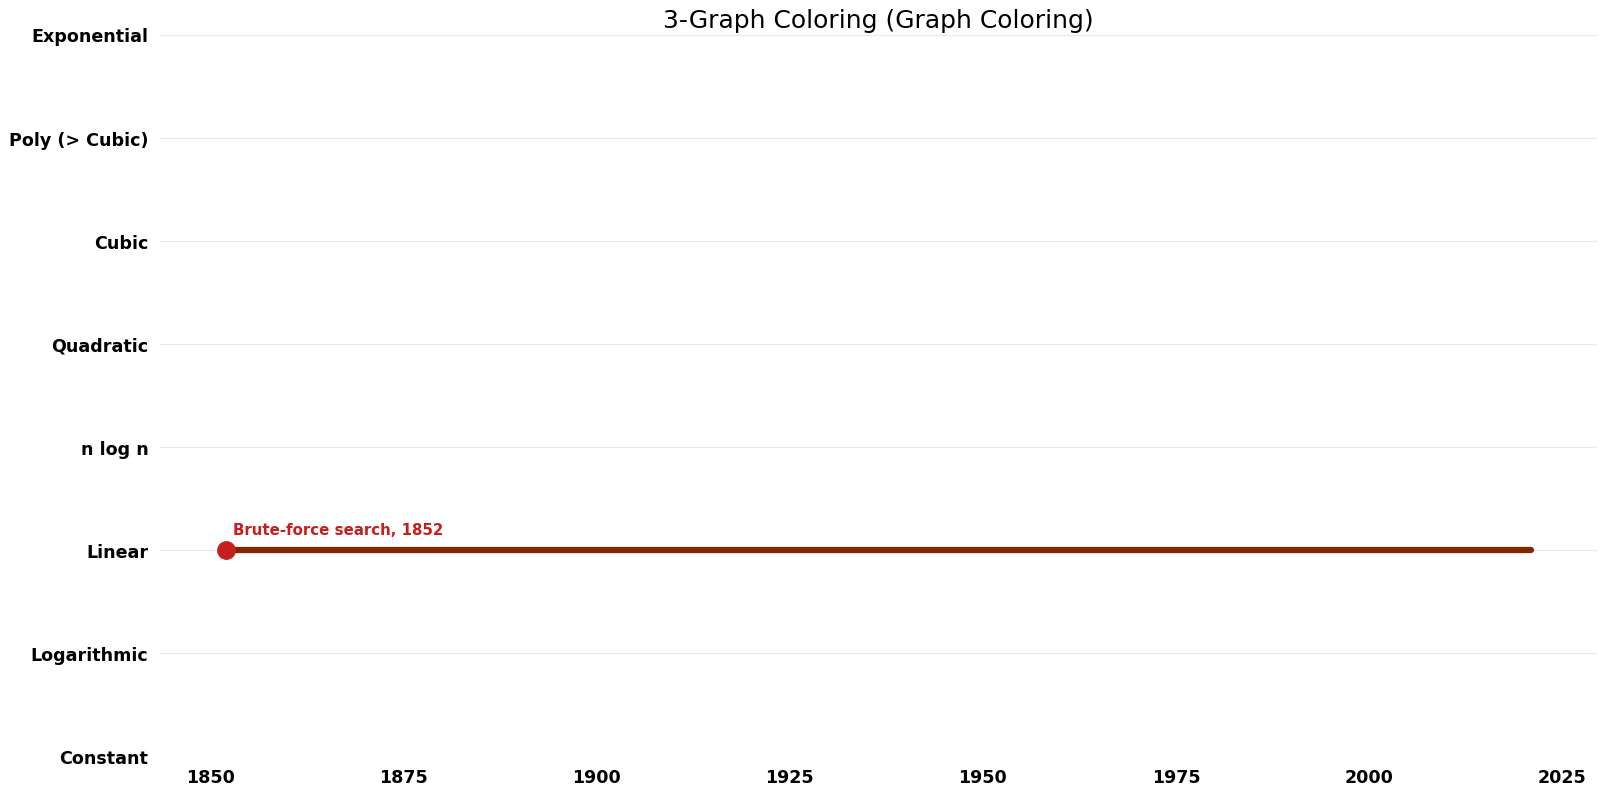 Graph Coloring - 3-Graph Coloring - Space.png